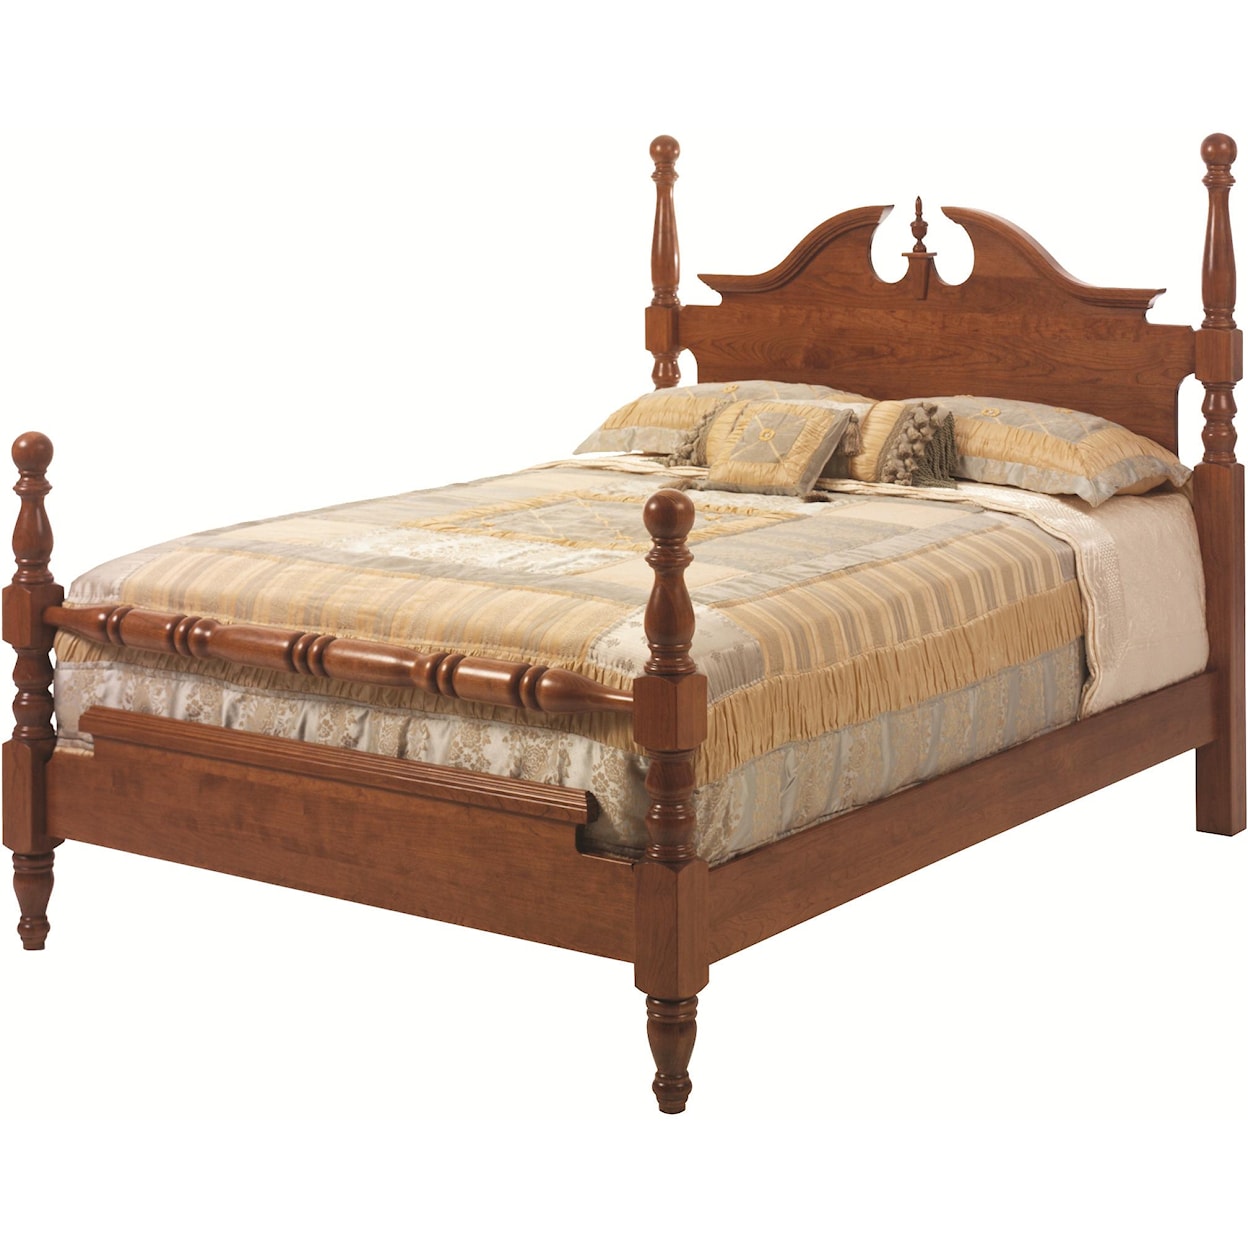 Millcraft Victoria's Tradition Queen Cannon Ball Bed